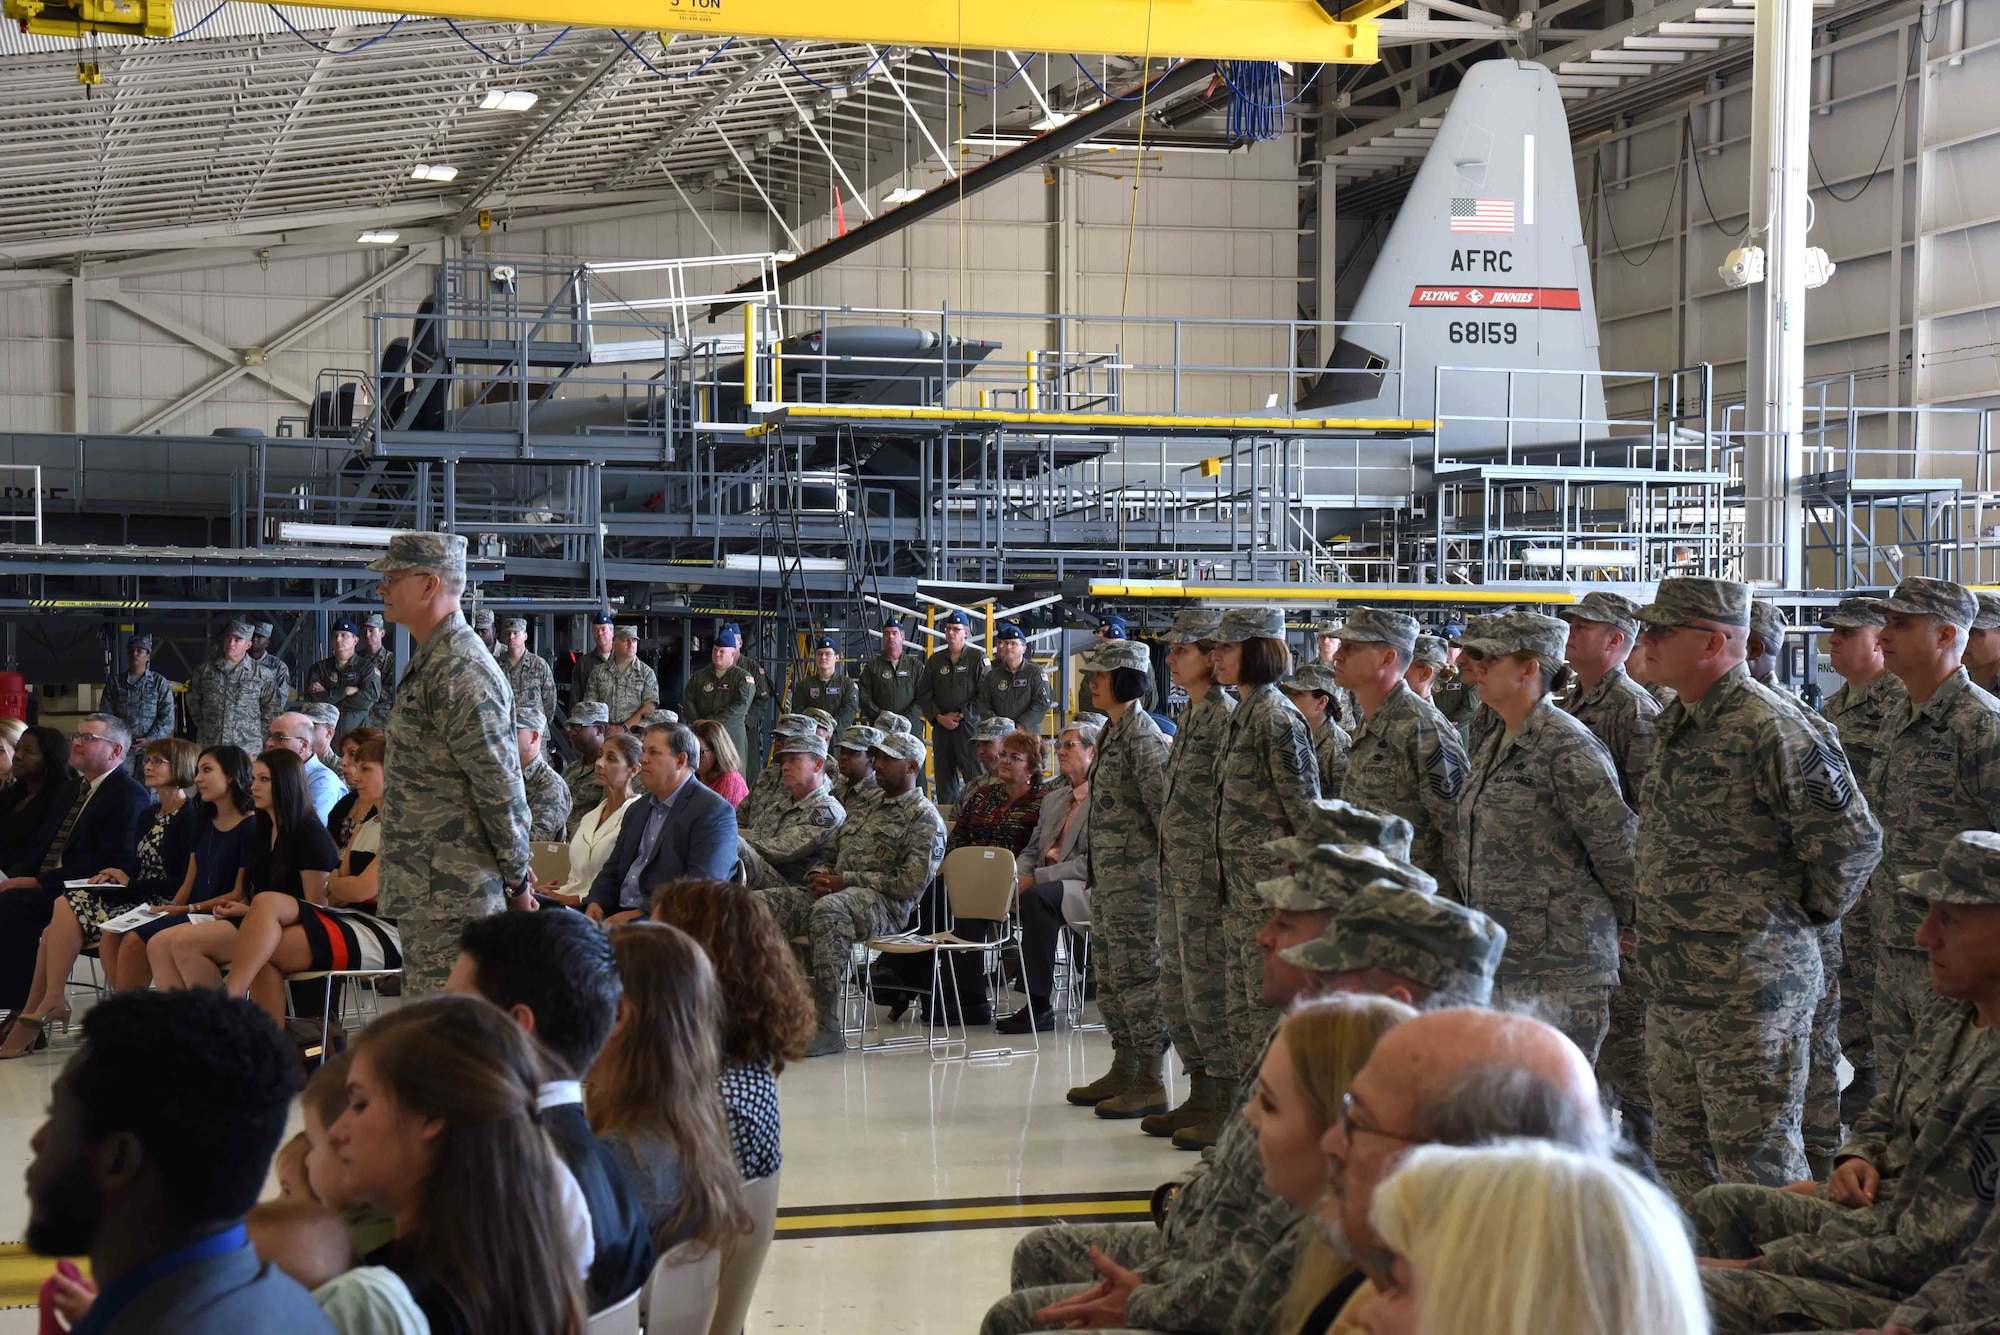 Audience members listen to a speech by Maj. Gen. Craig L. La Fave, 22nd Air Force commander, during a change of command ceremony Nov. 14, 2017, at Keesler Air Force Base, Mississippi. La Fave took command of 22nd Air Force during the ceremony, which took place during the 22nd AF Senior Leader Summit hosted by the 403rd Wing at Keesler AFB Nov. 13 through Nov. 16, 2017. (U.S. Air Force photo by Tech. Sgt. Ryan Labadens)